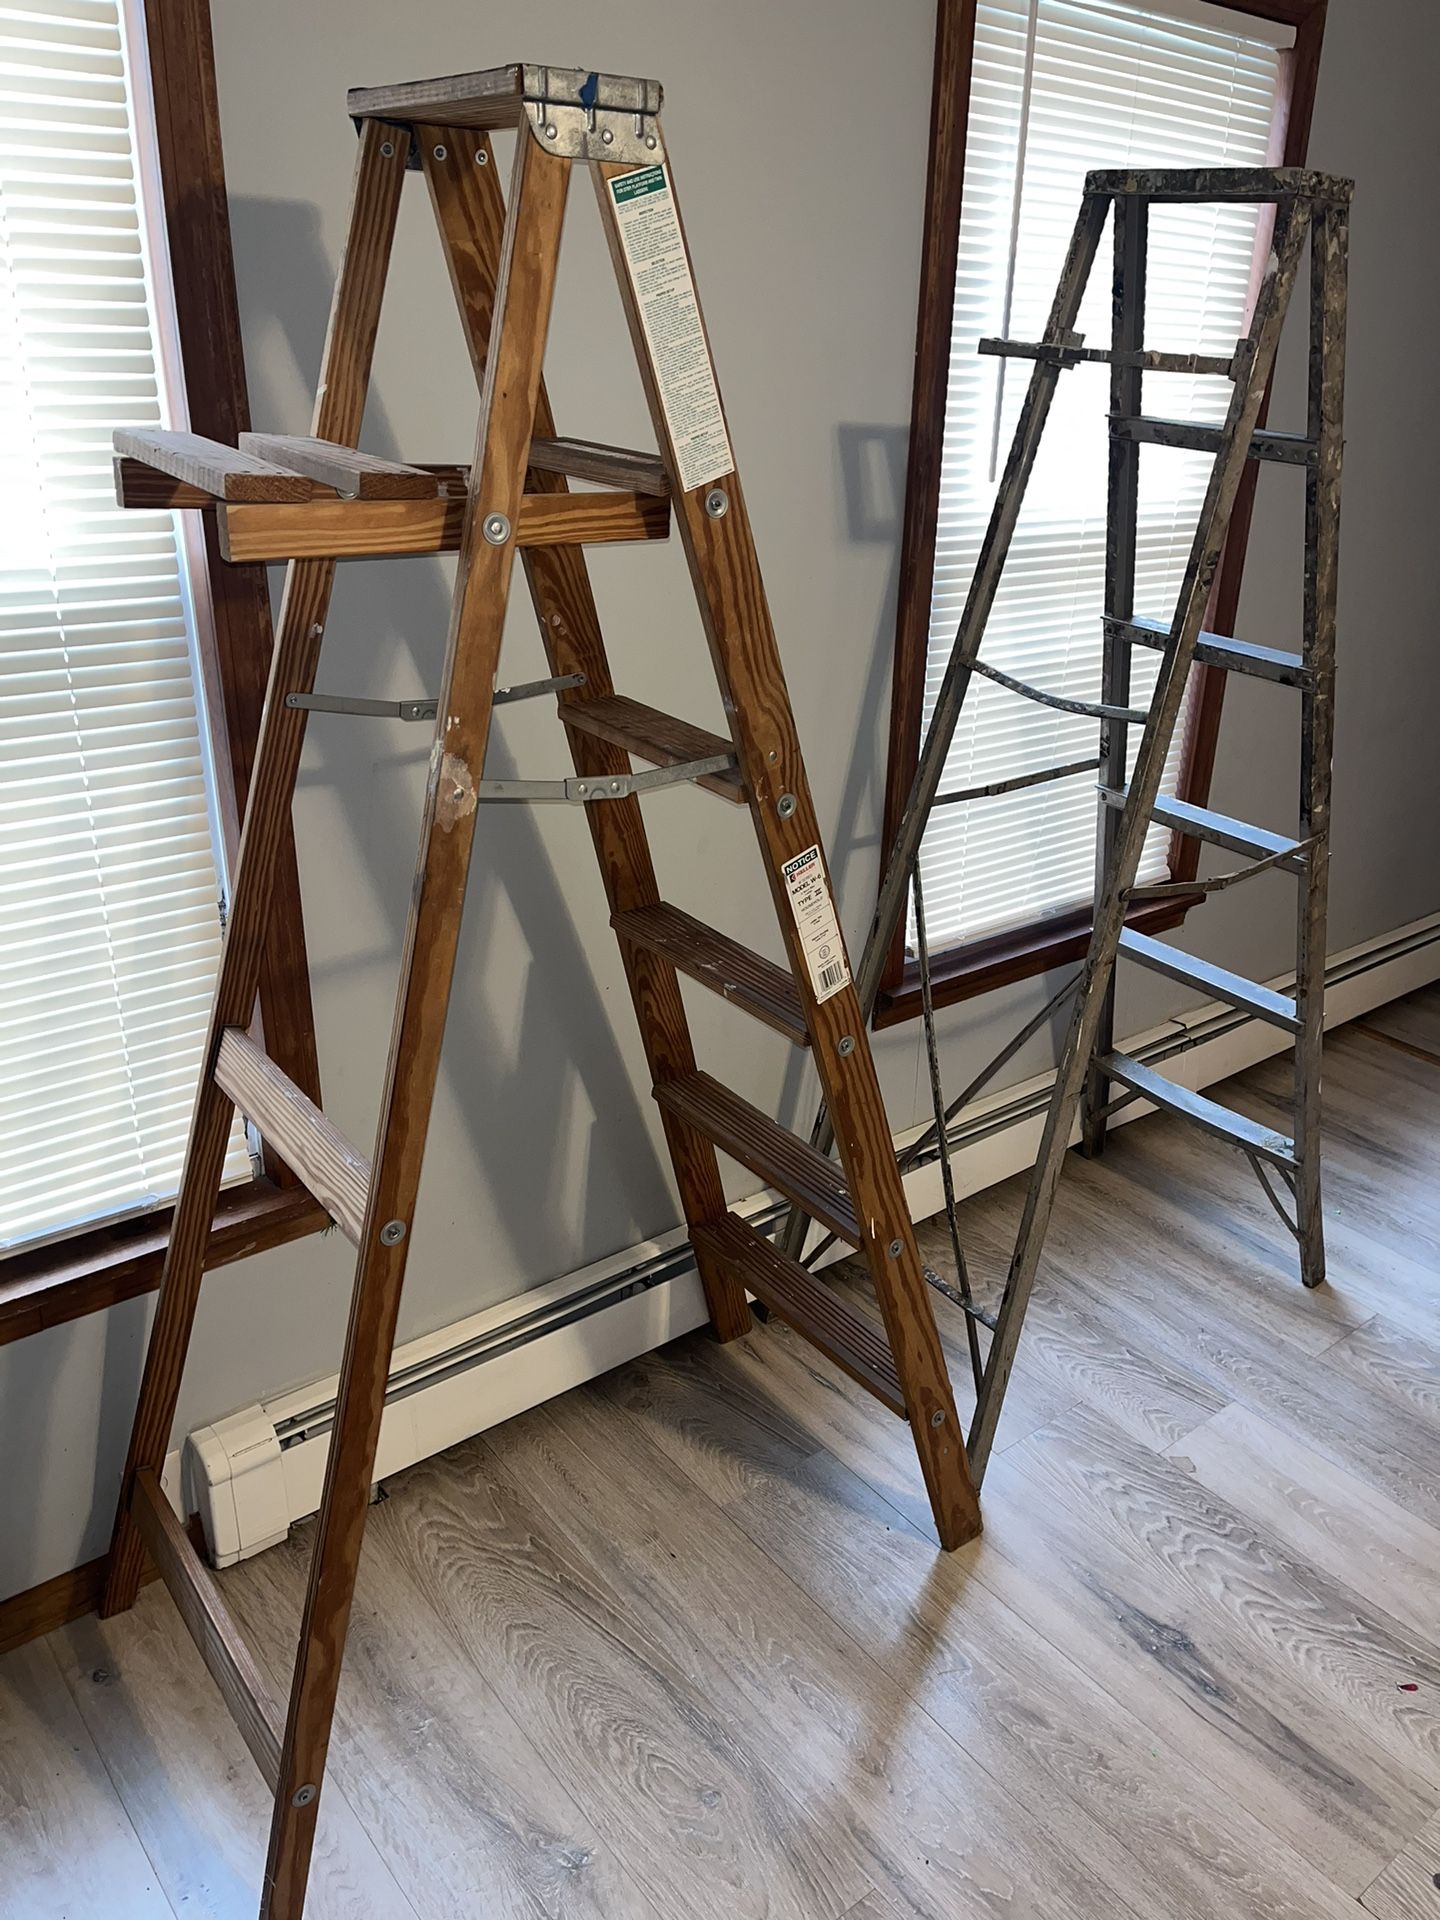 Two 6 Foot Ladders For Sale